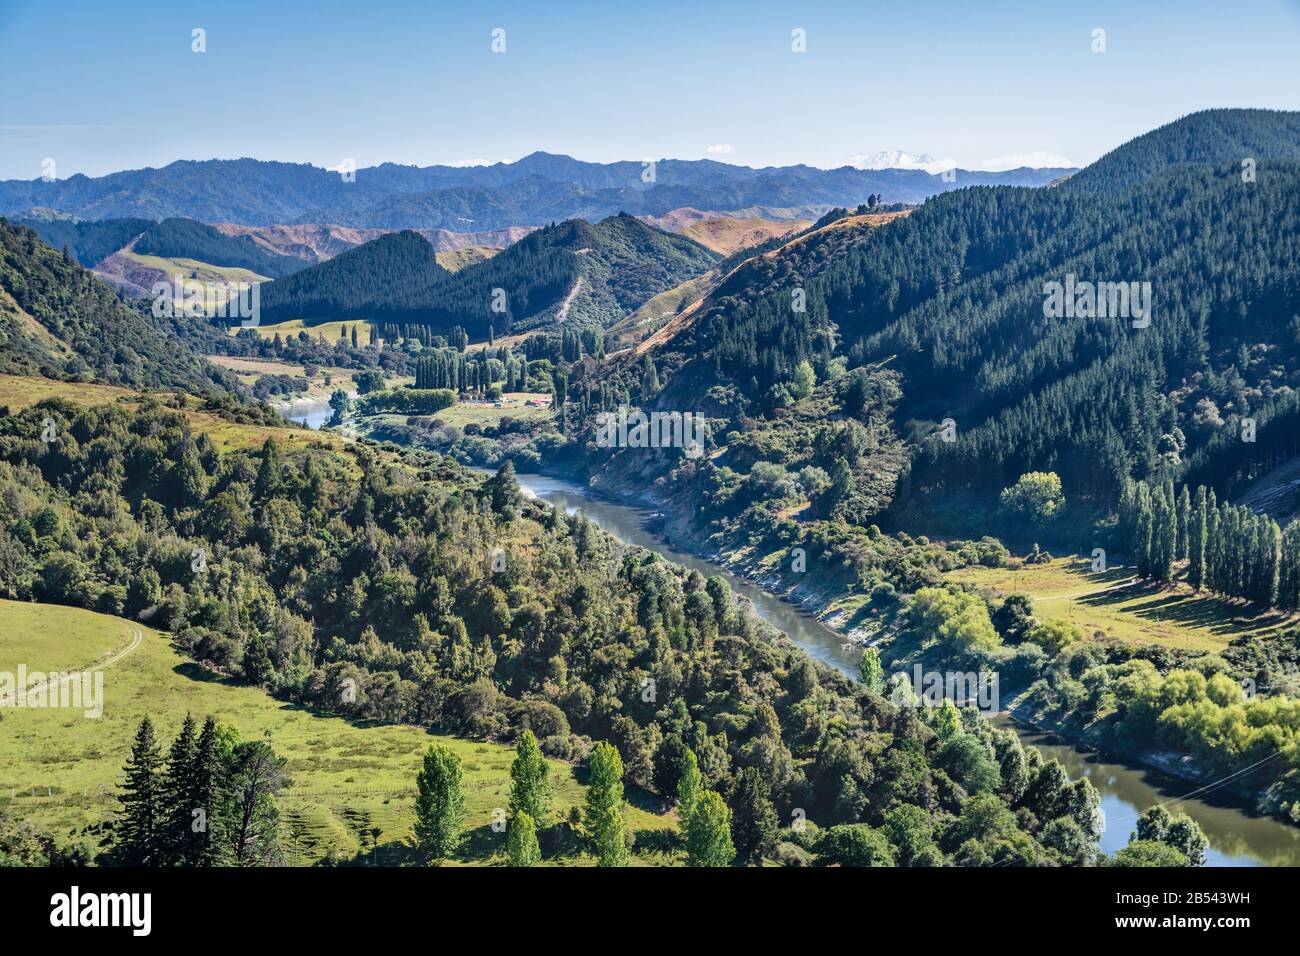 View on the Whanganui river and valley, New Zealand Stock Photo